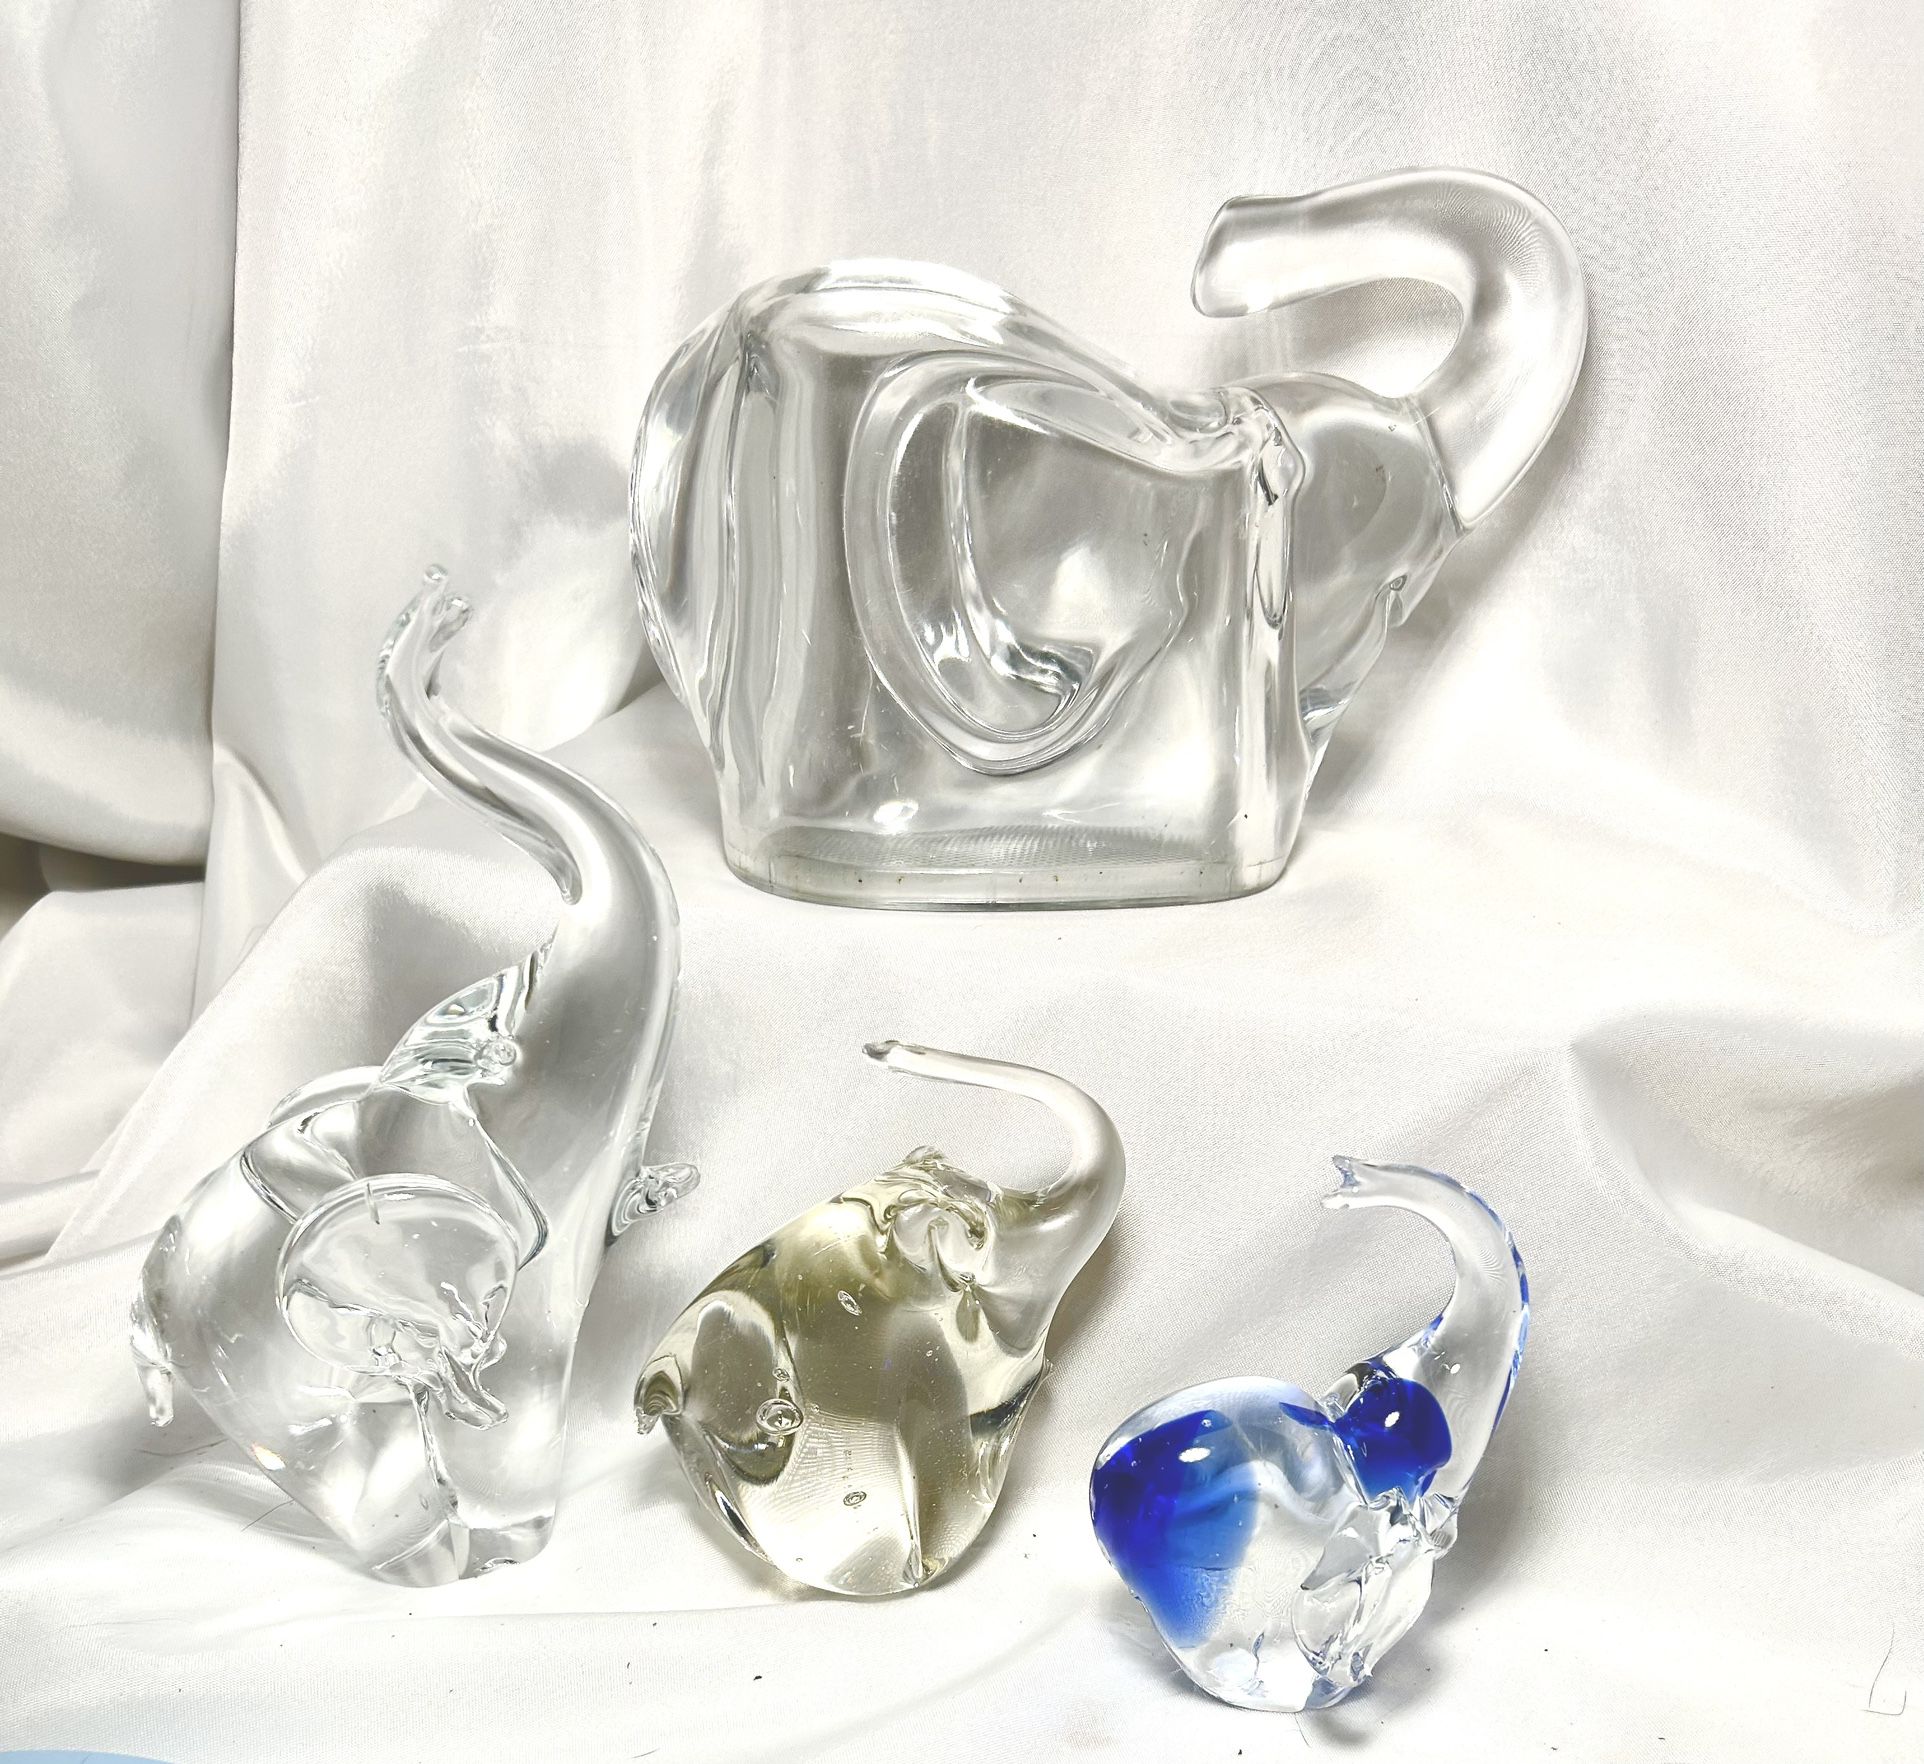 Glass Elephant figurines/ paperweights/piggy bank. all 4 have trunks up for good luck! Beautiful